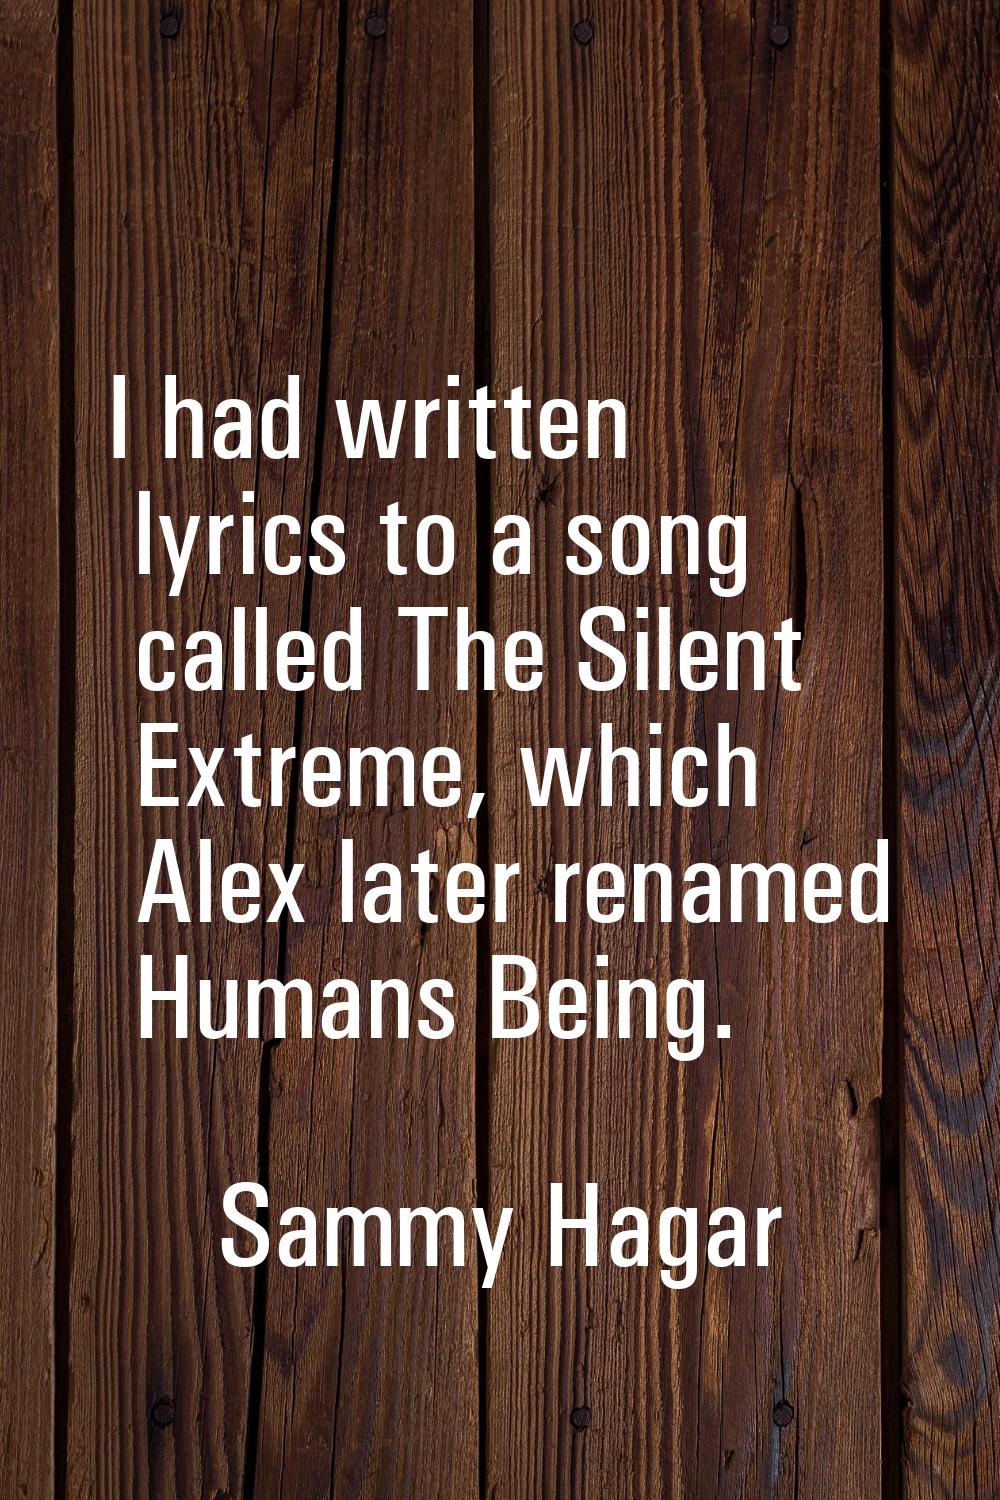 I had written lyrics to a song called The Silent Extreme, which Alex later renamed Humans Being.